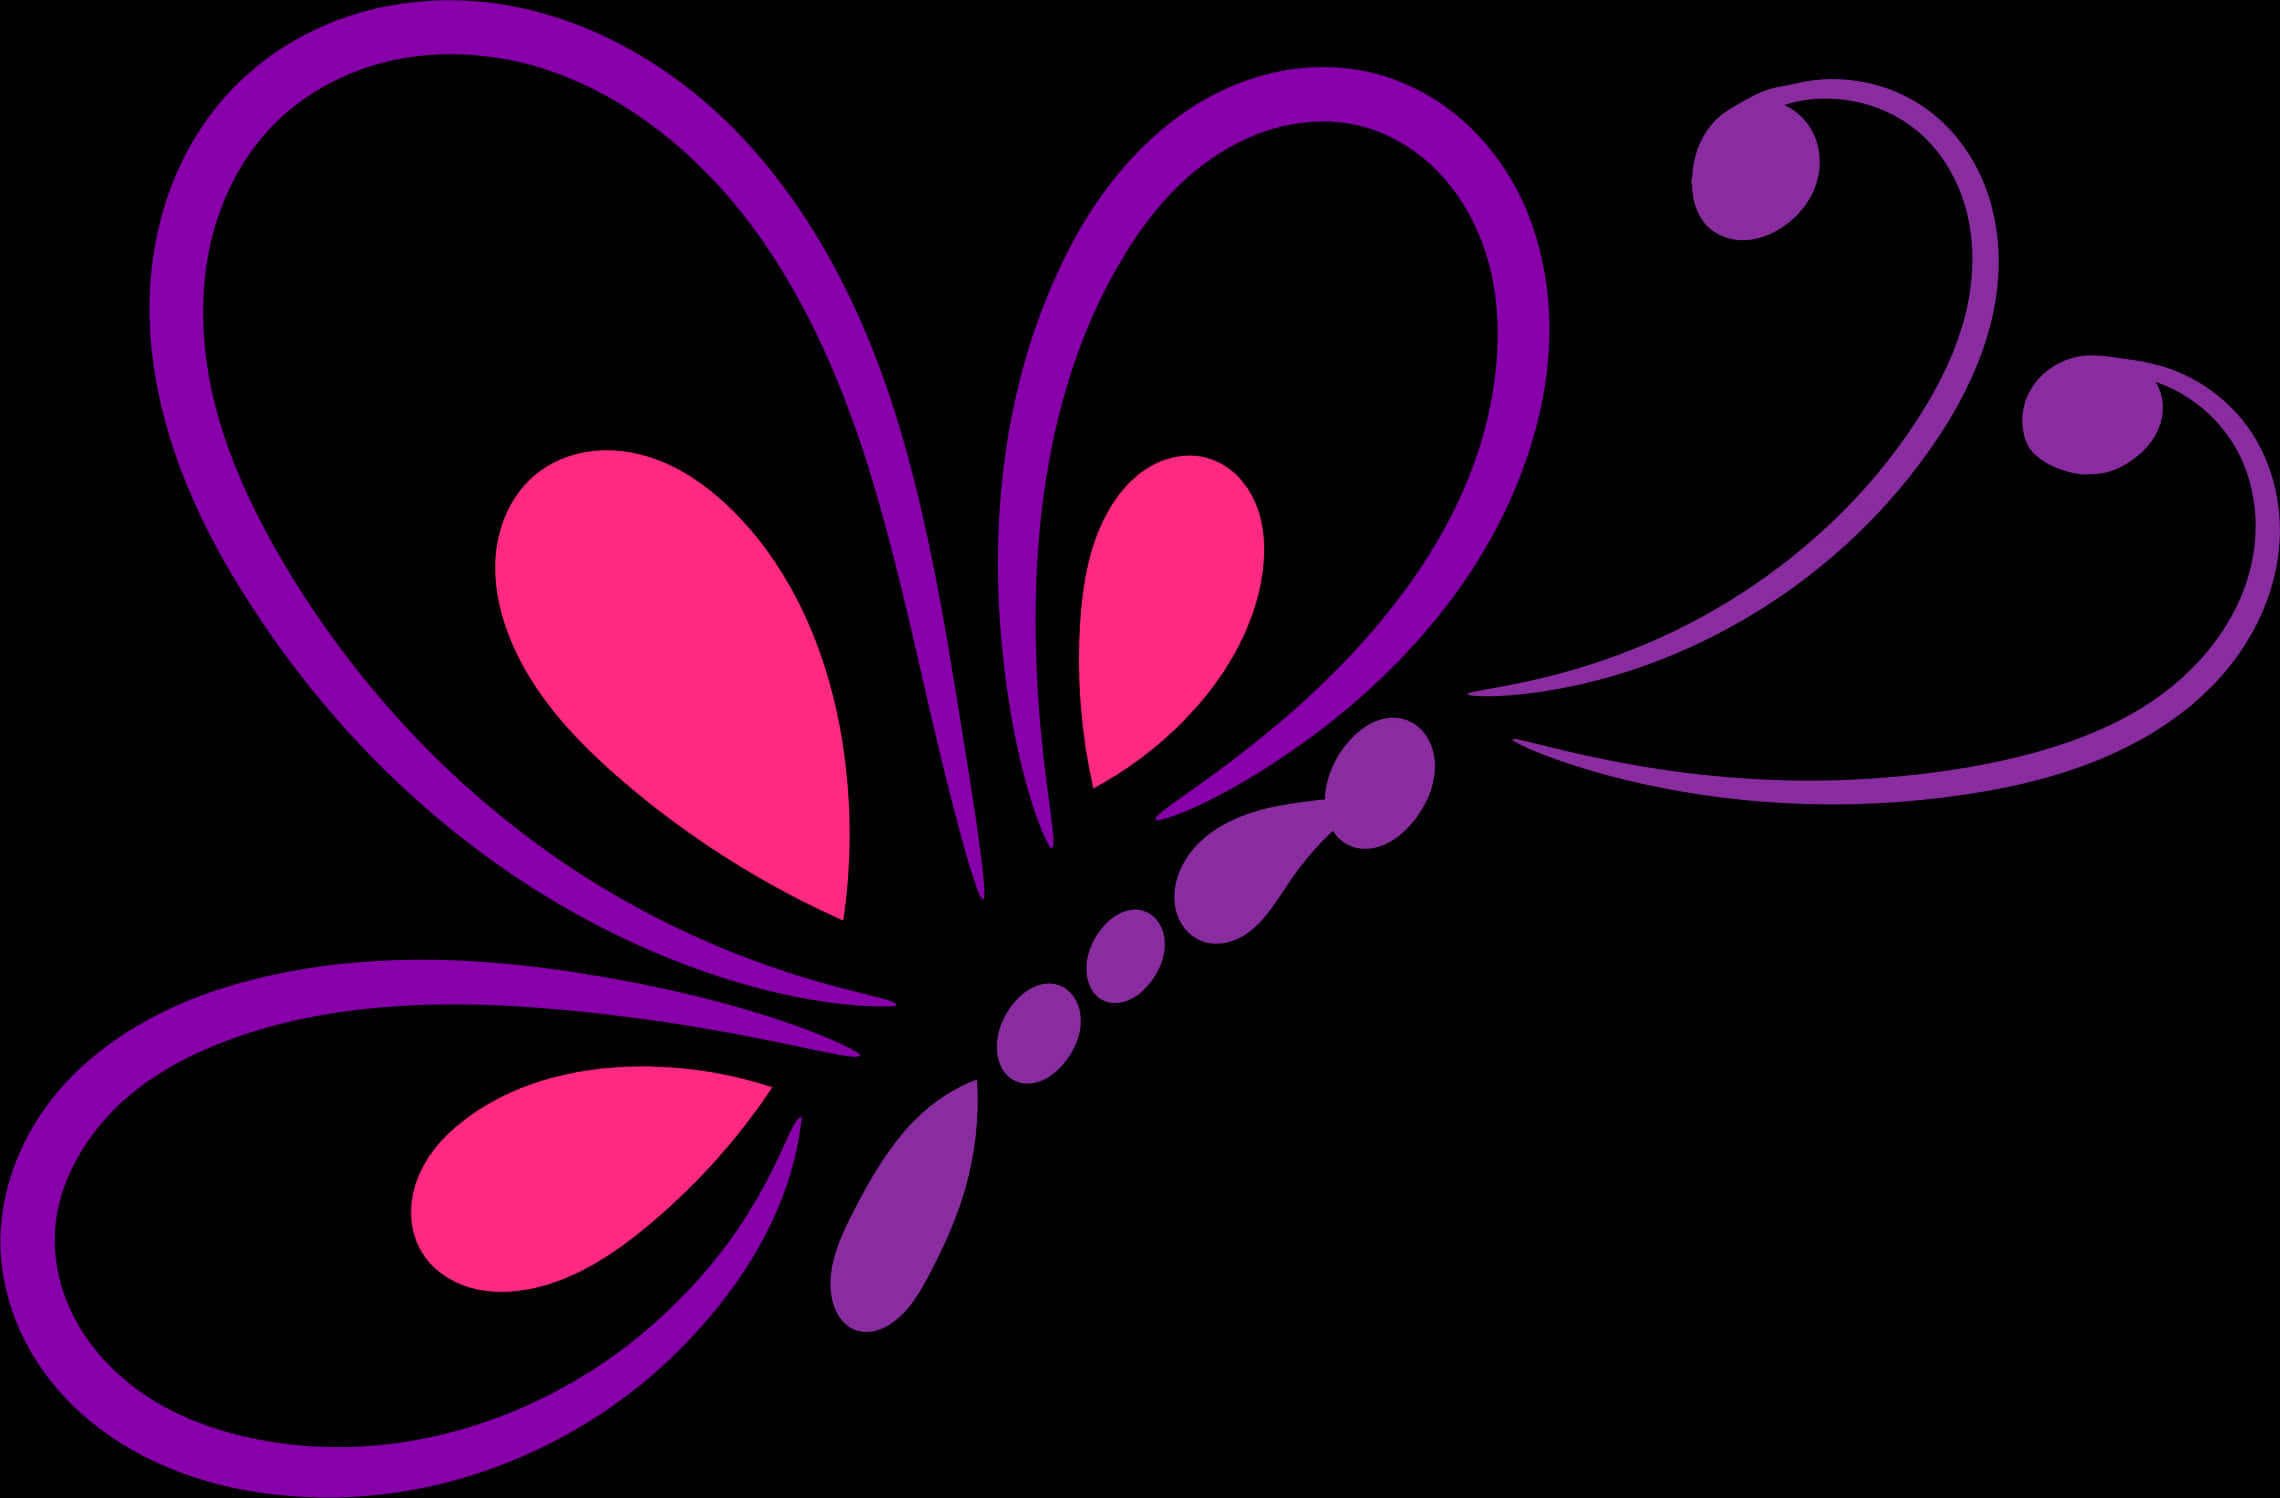 Abstract Pinkand Purple Butterfly Graphic